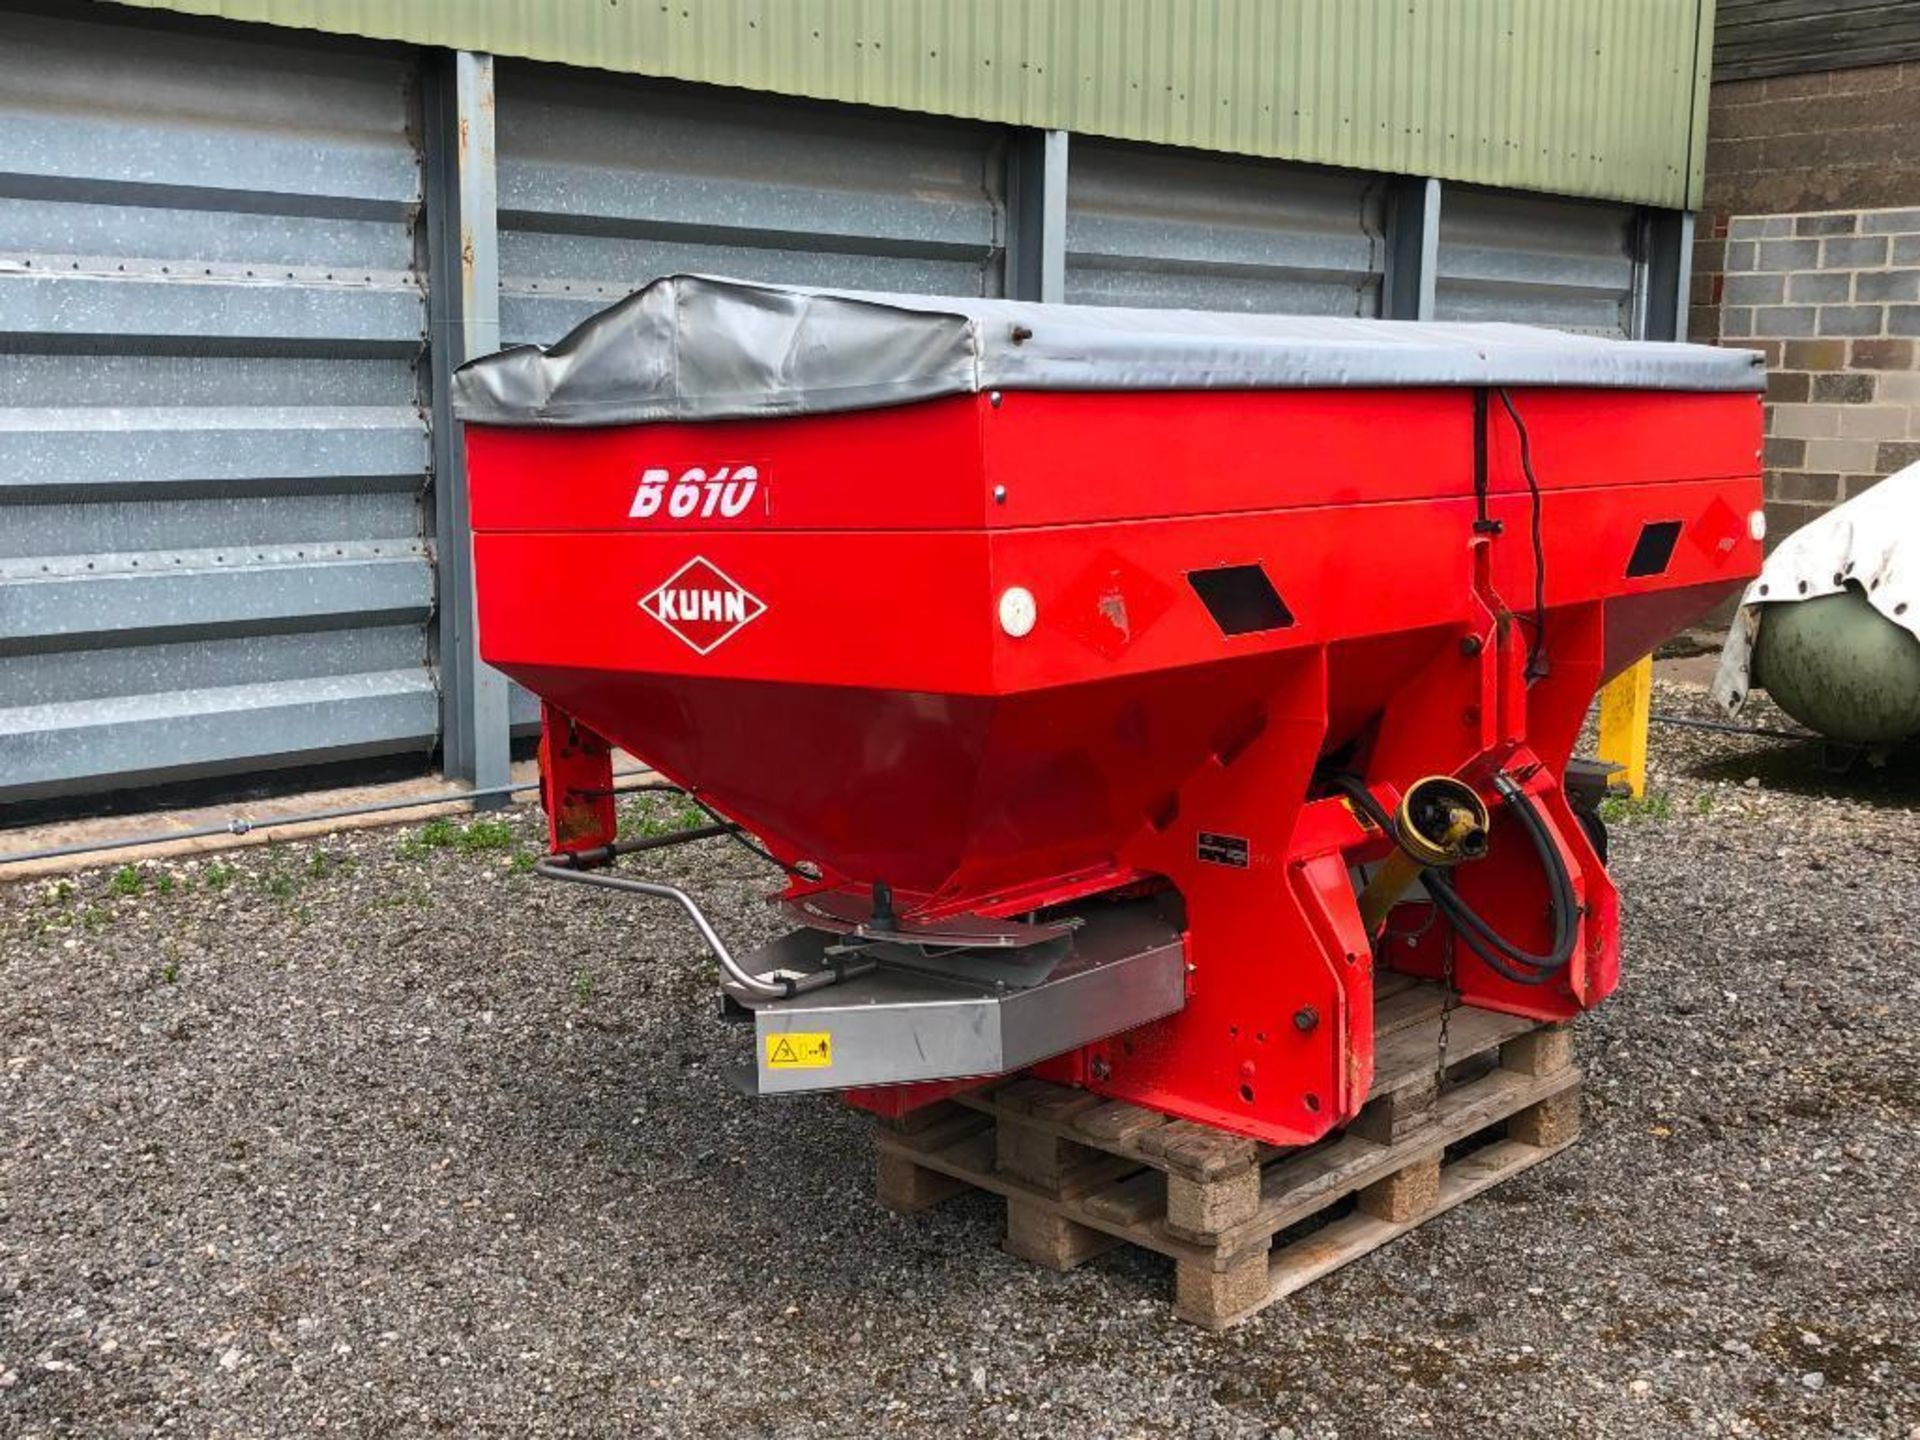 1997 Kuhn MDS 1141 20m twin disc fertiliser spreader with B610 hopper extension, comes with addition - Image 9 of 12